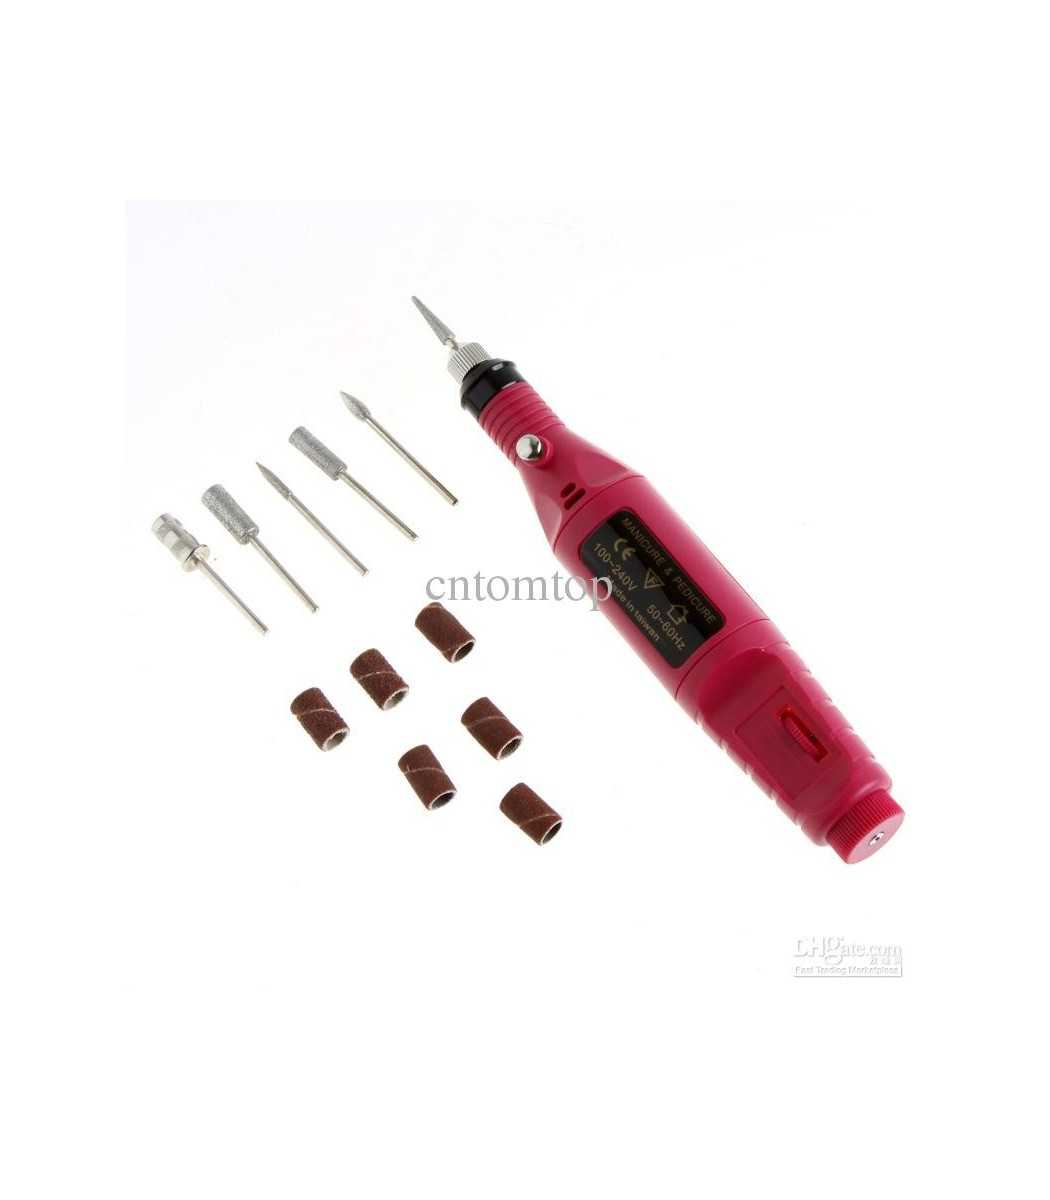 Speed Rotary Carver Nail Acrylic Polish Manicures & Pedicures Machine